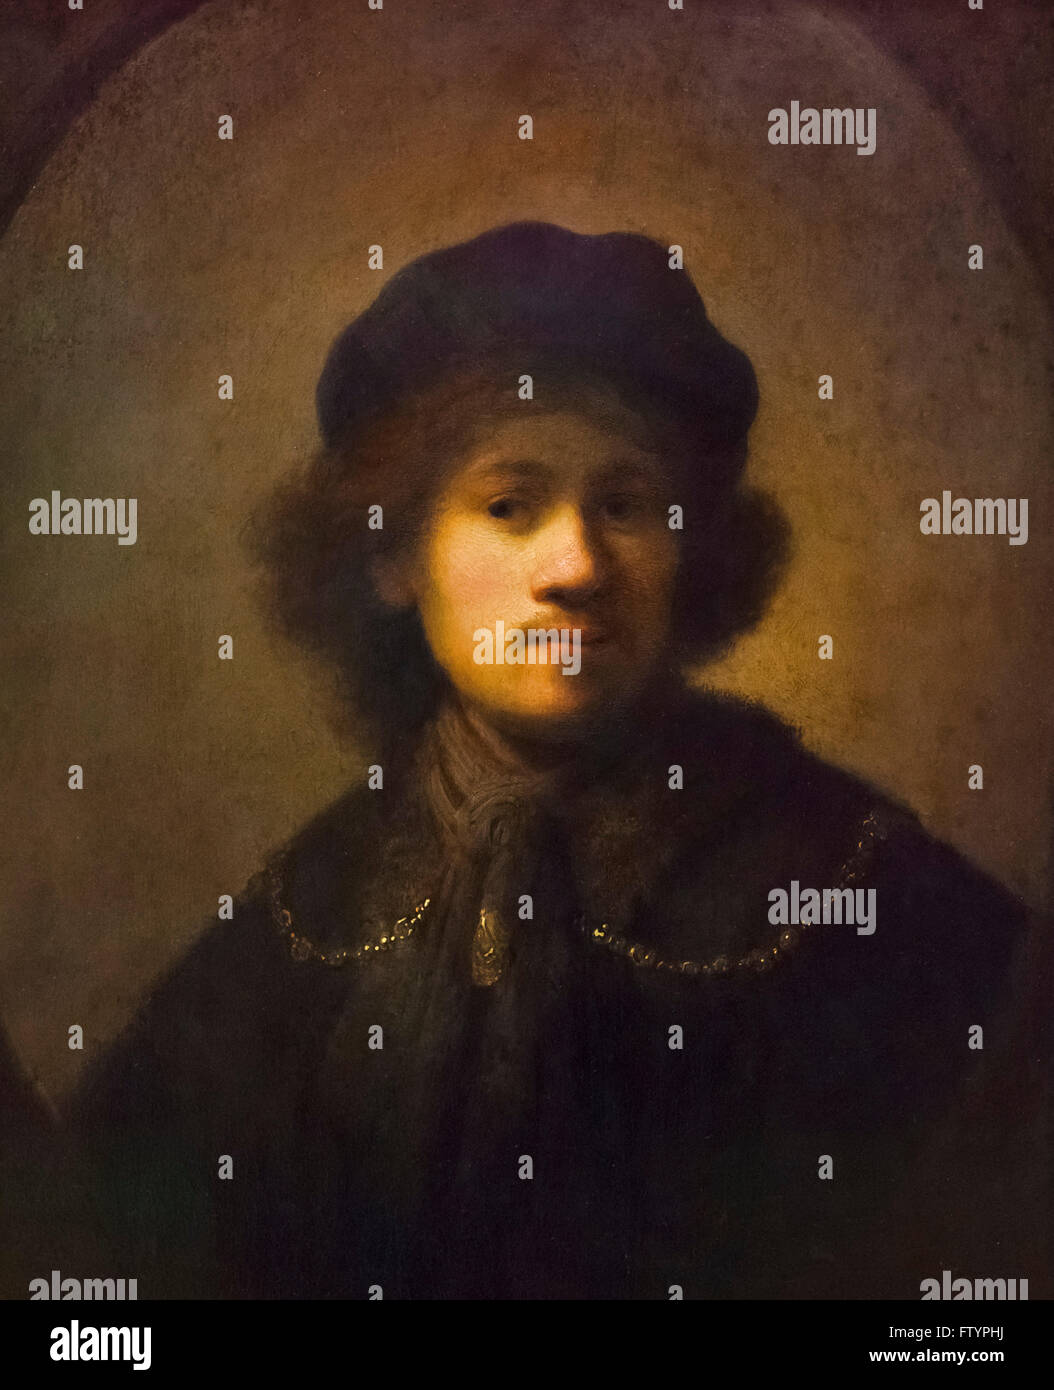 Rembrandt, Self-Portrait as a Young Man c.1629-31 Stock Photo